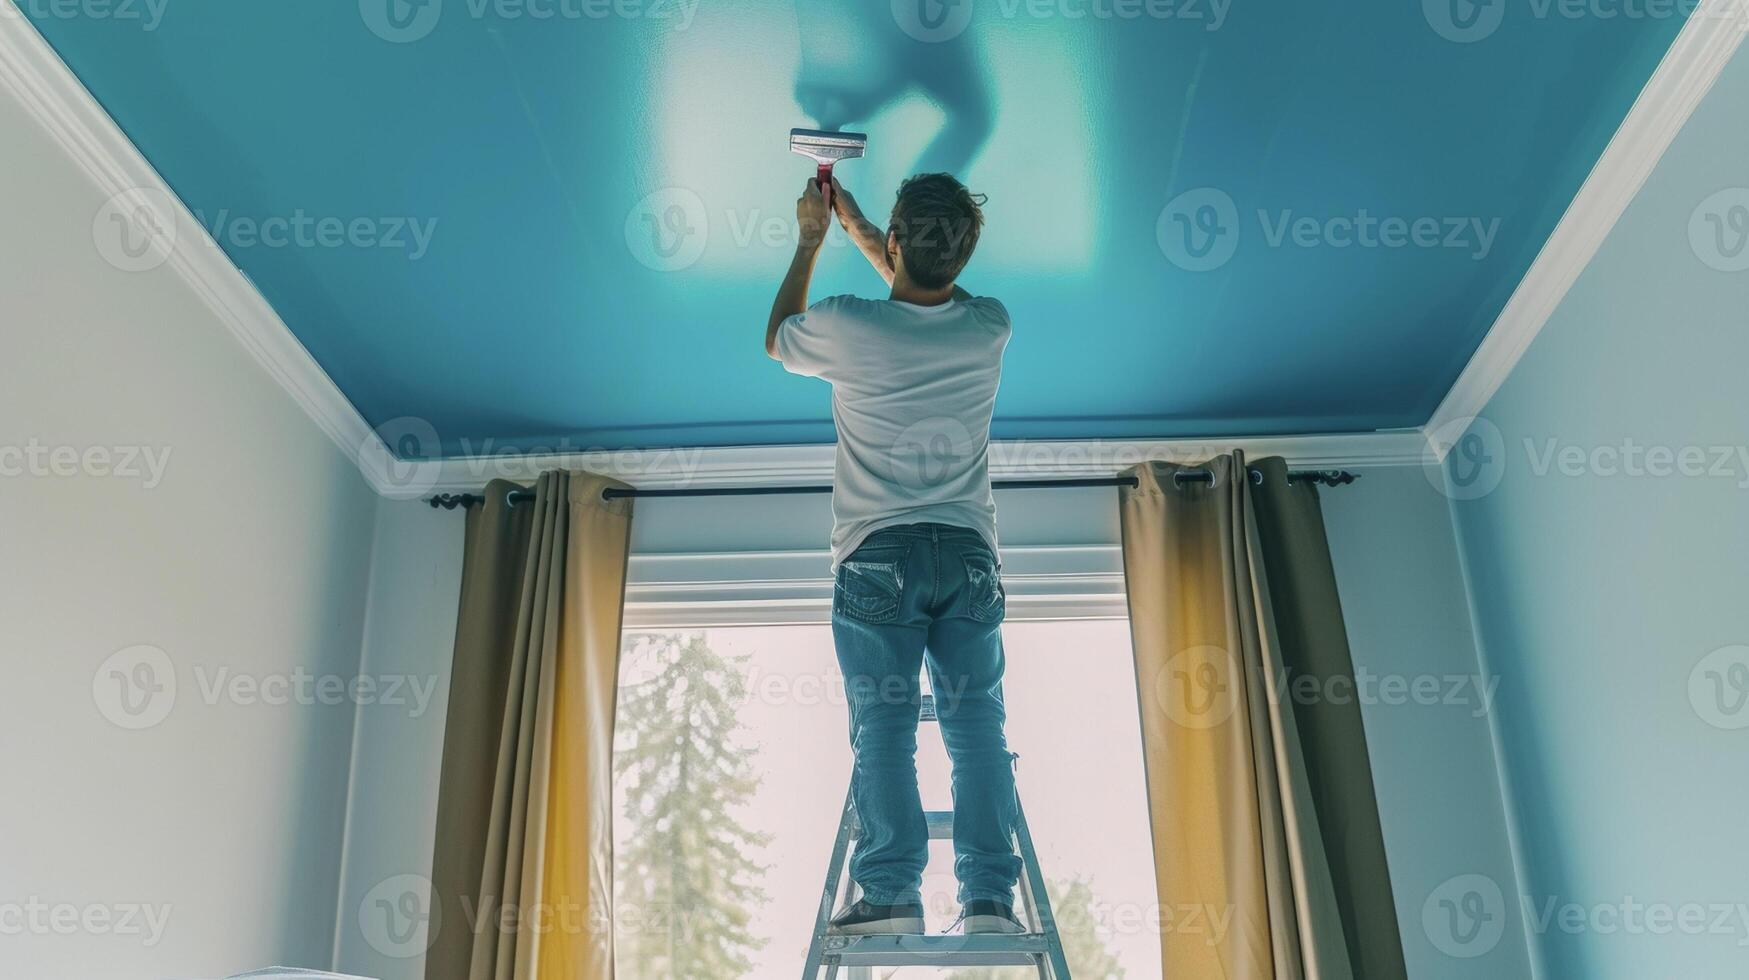 A man stands on a ladder meticulously painting the ceiling of his bedroom in a bold and playful color giving the room a unique and personalized touch photo